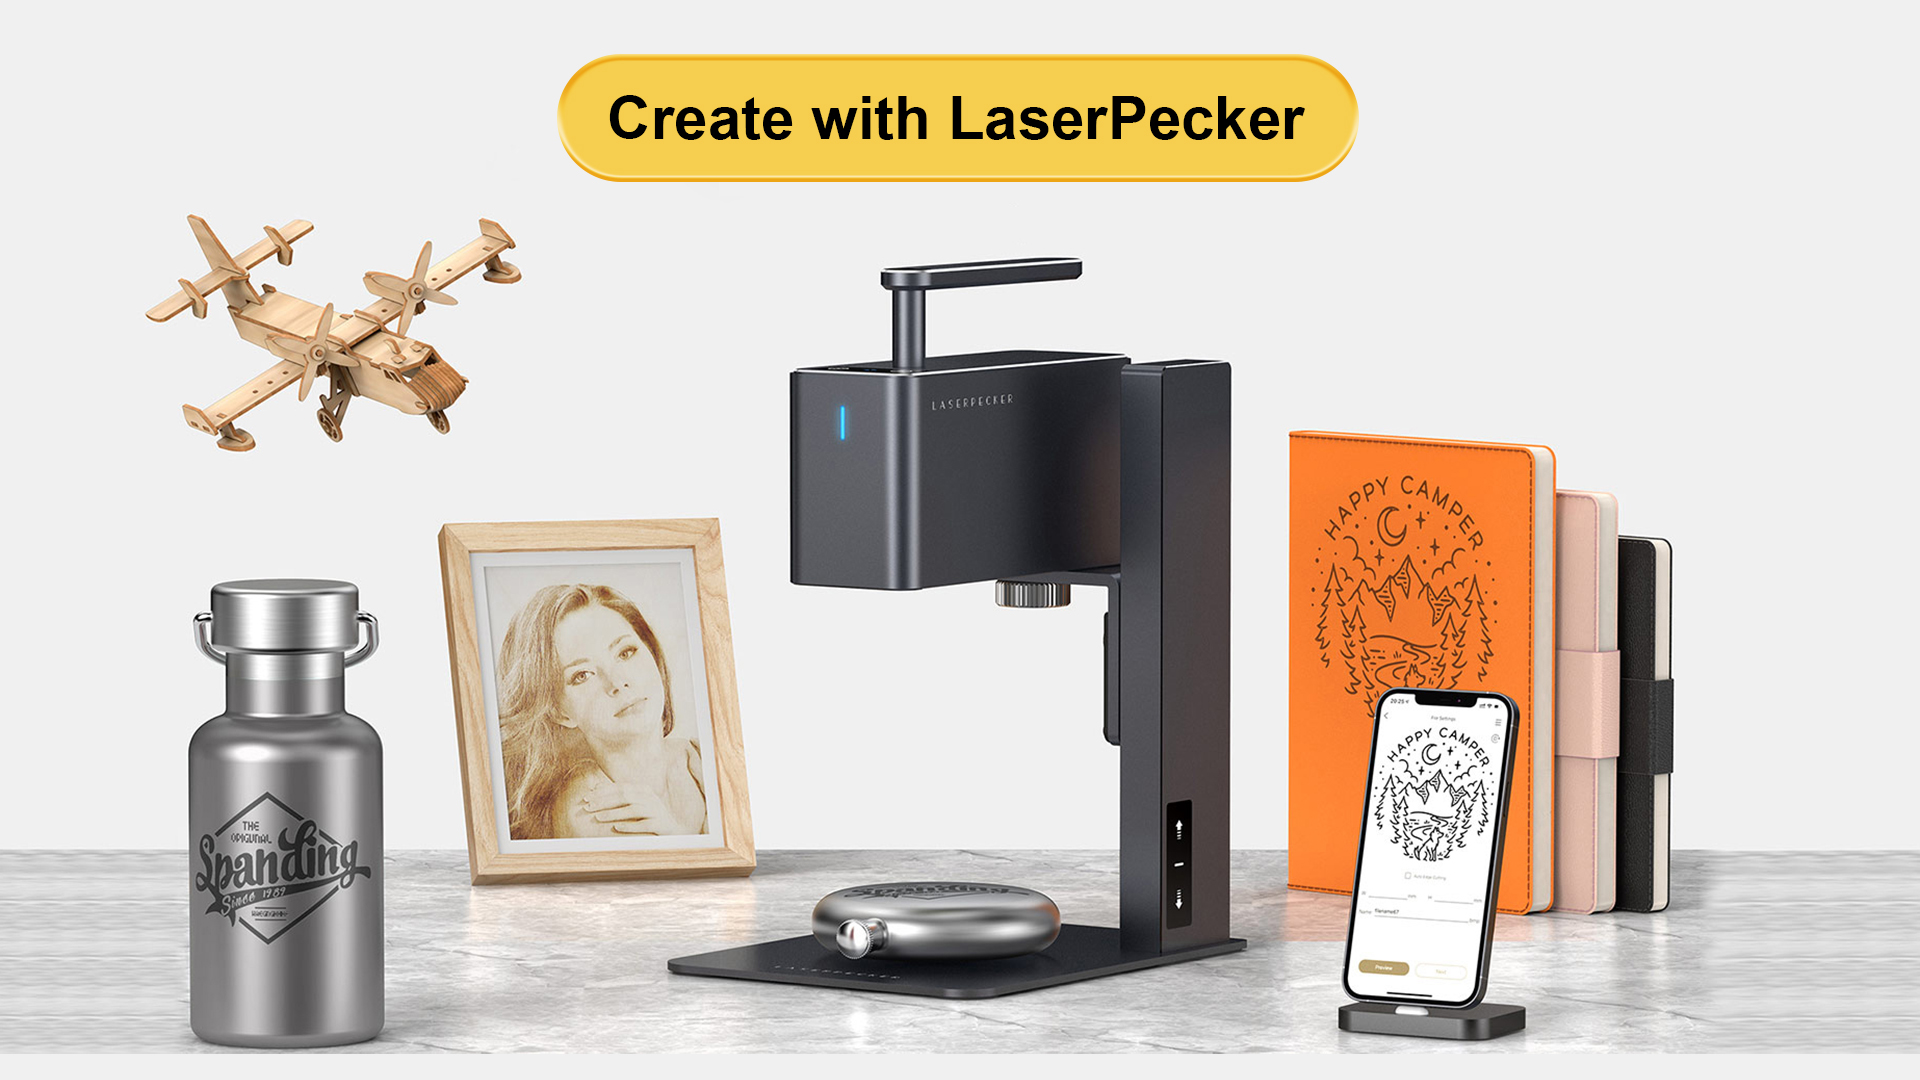 Get the LaserPecker 2 Handheld Laser Engraver Cutter for only 672€ with our exclusive coupon - GEEKBUYING